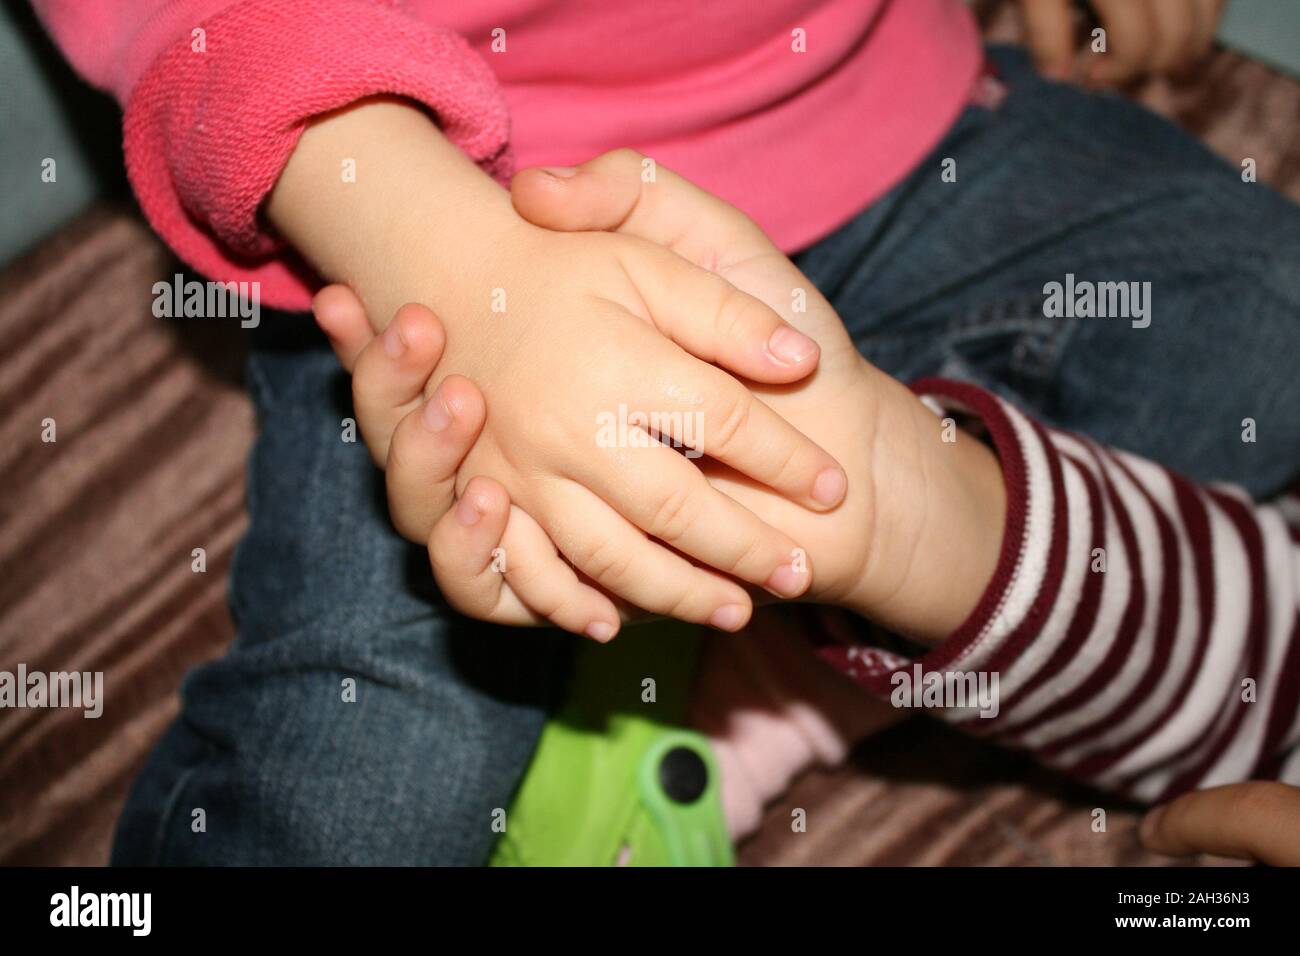 hands as a symbol of childhood friendship, mutual support and love Stock Photo